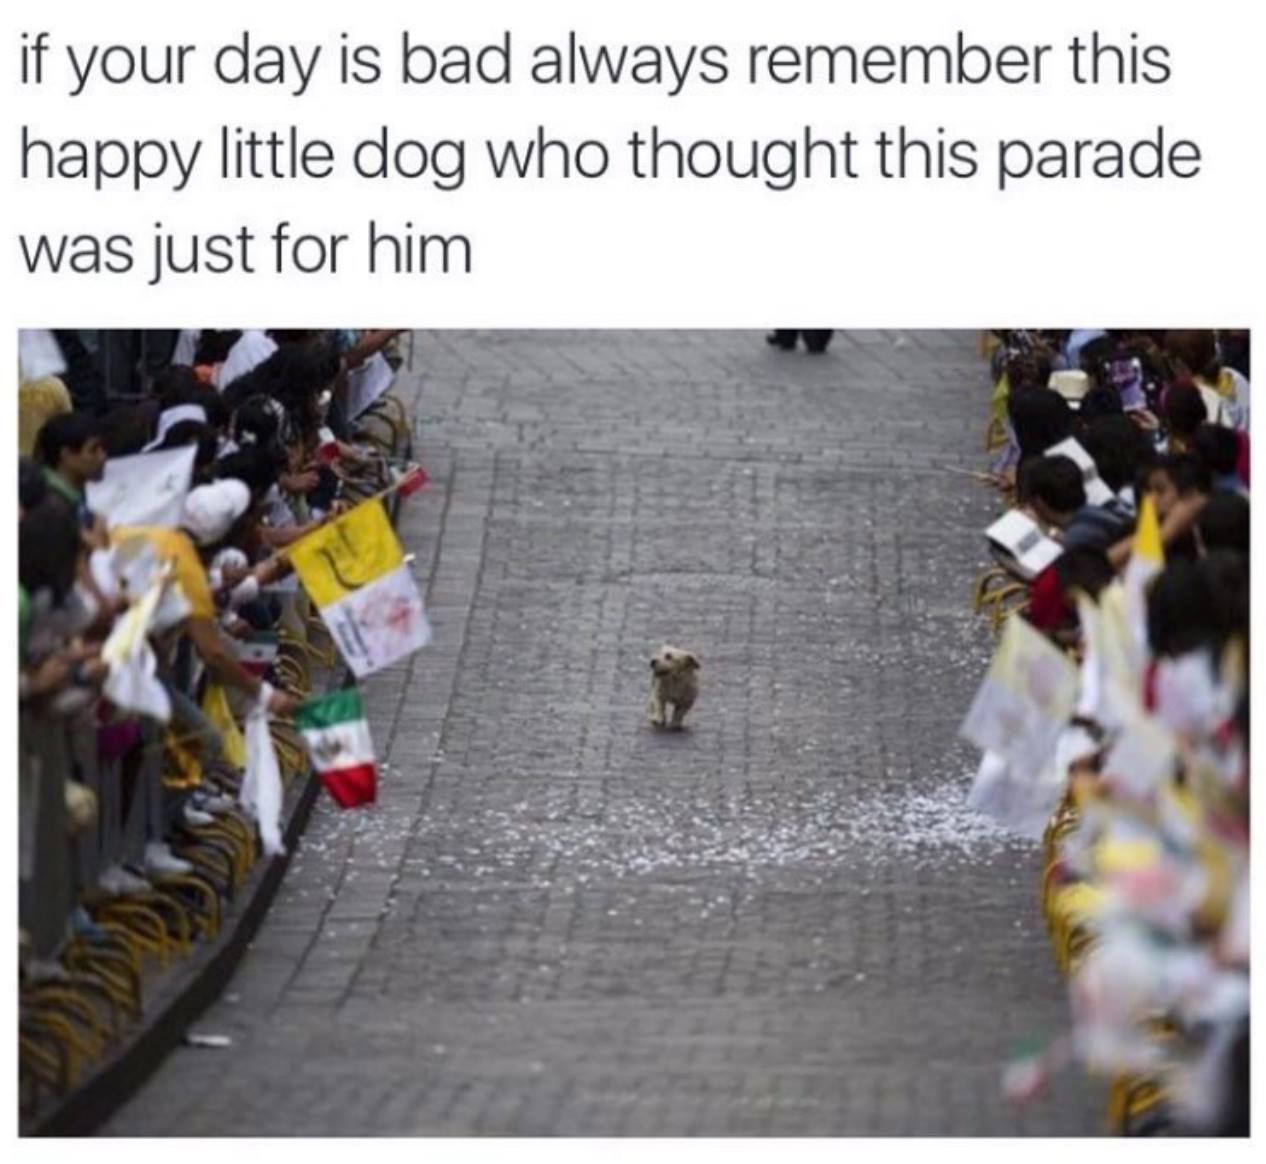 dog who thinks parade is for him - if your day is bad always remember this happy little dog who thought this parade was just for him